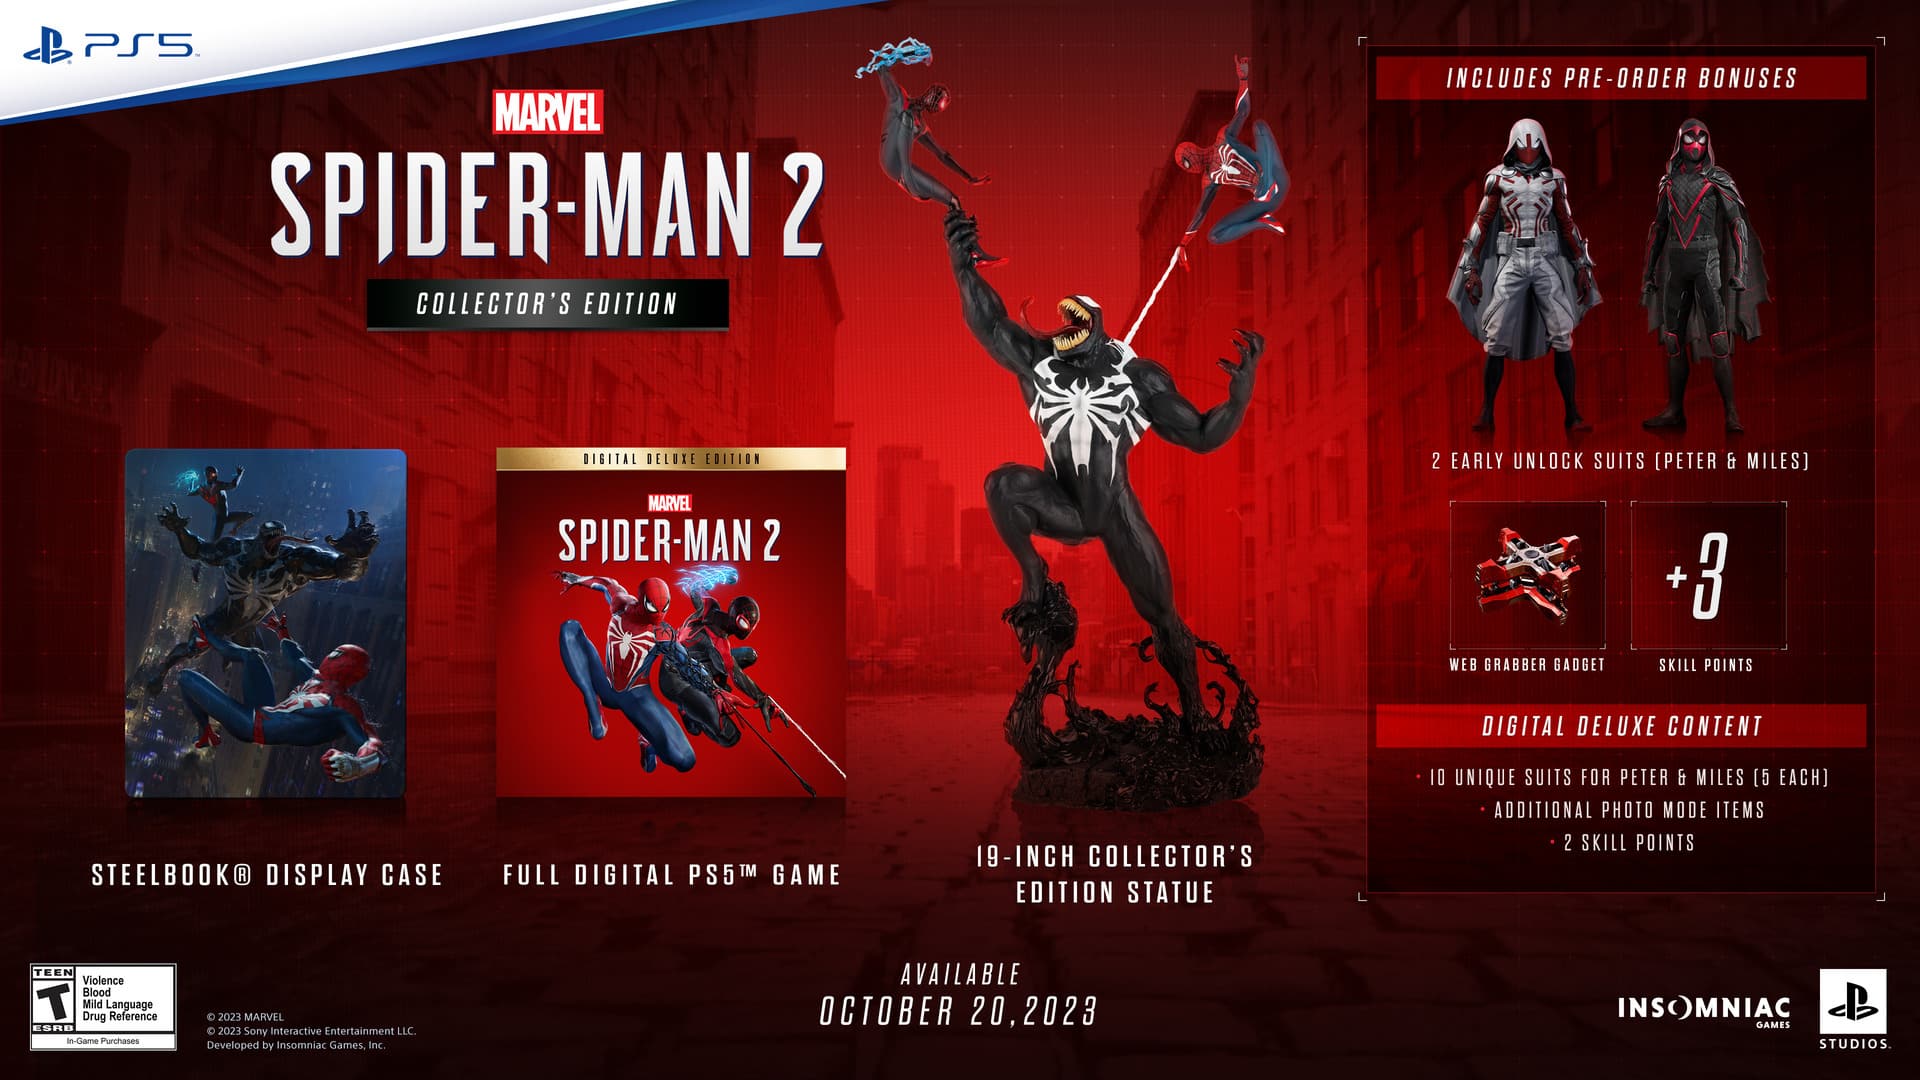 Marvel's Spider-Man 2 Collector's